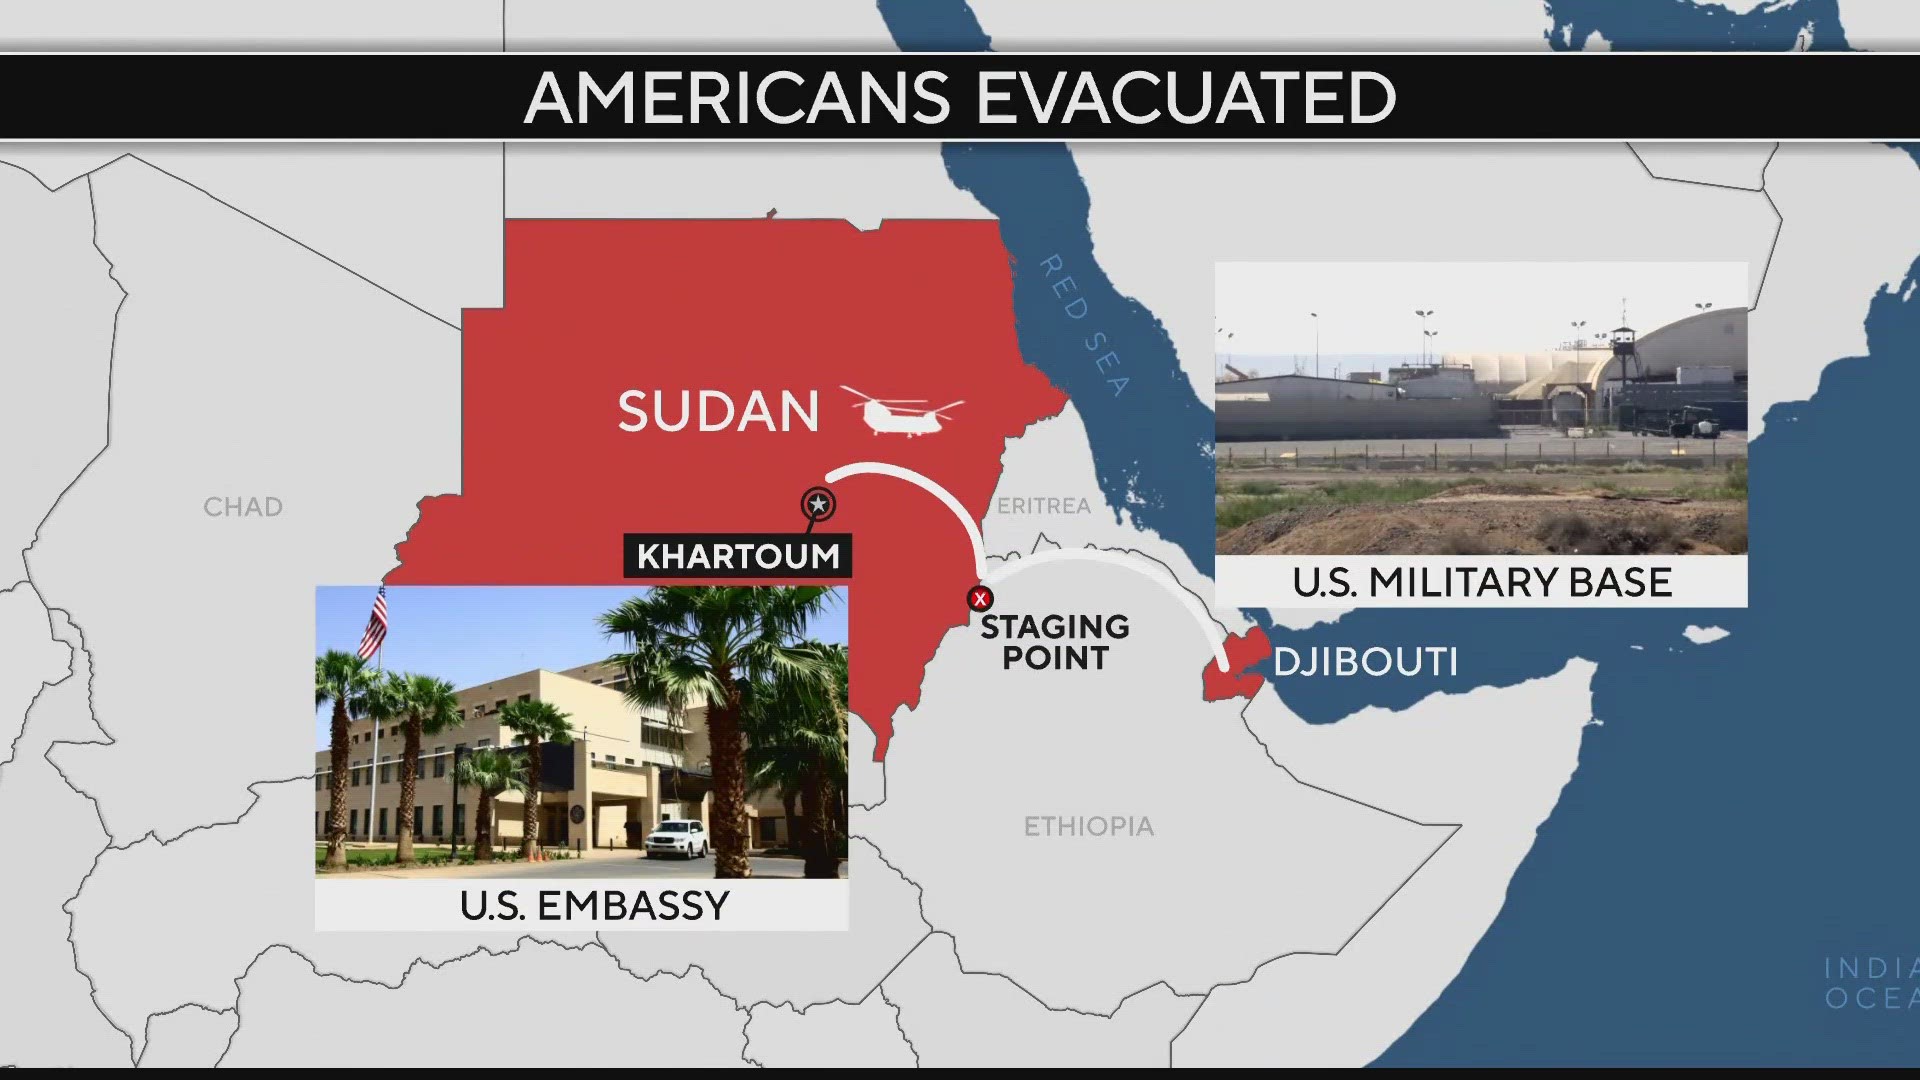 A U.S. military mission got the embassy workers out of Sudan as the country teeters on the brink of civil war.